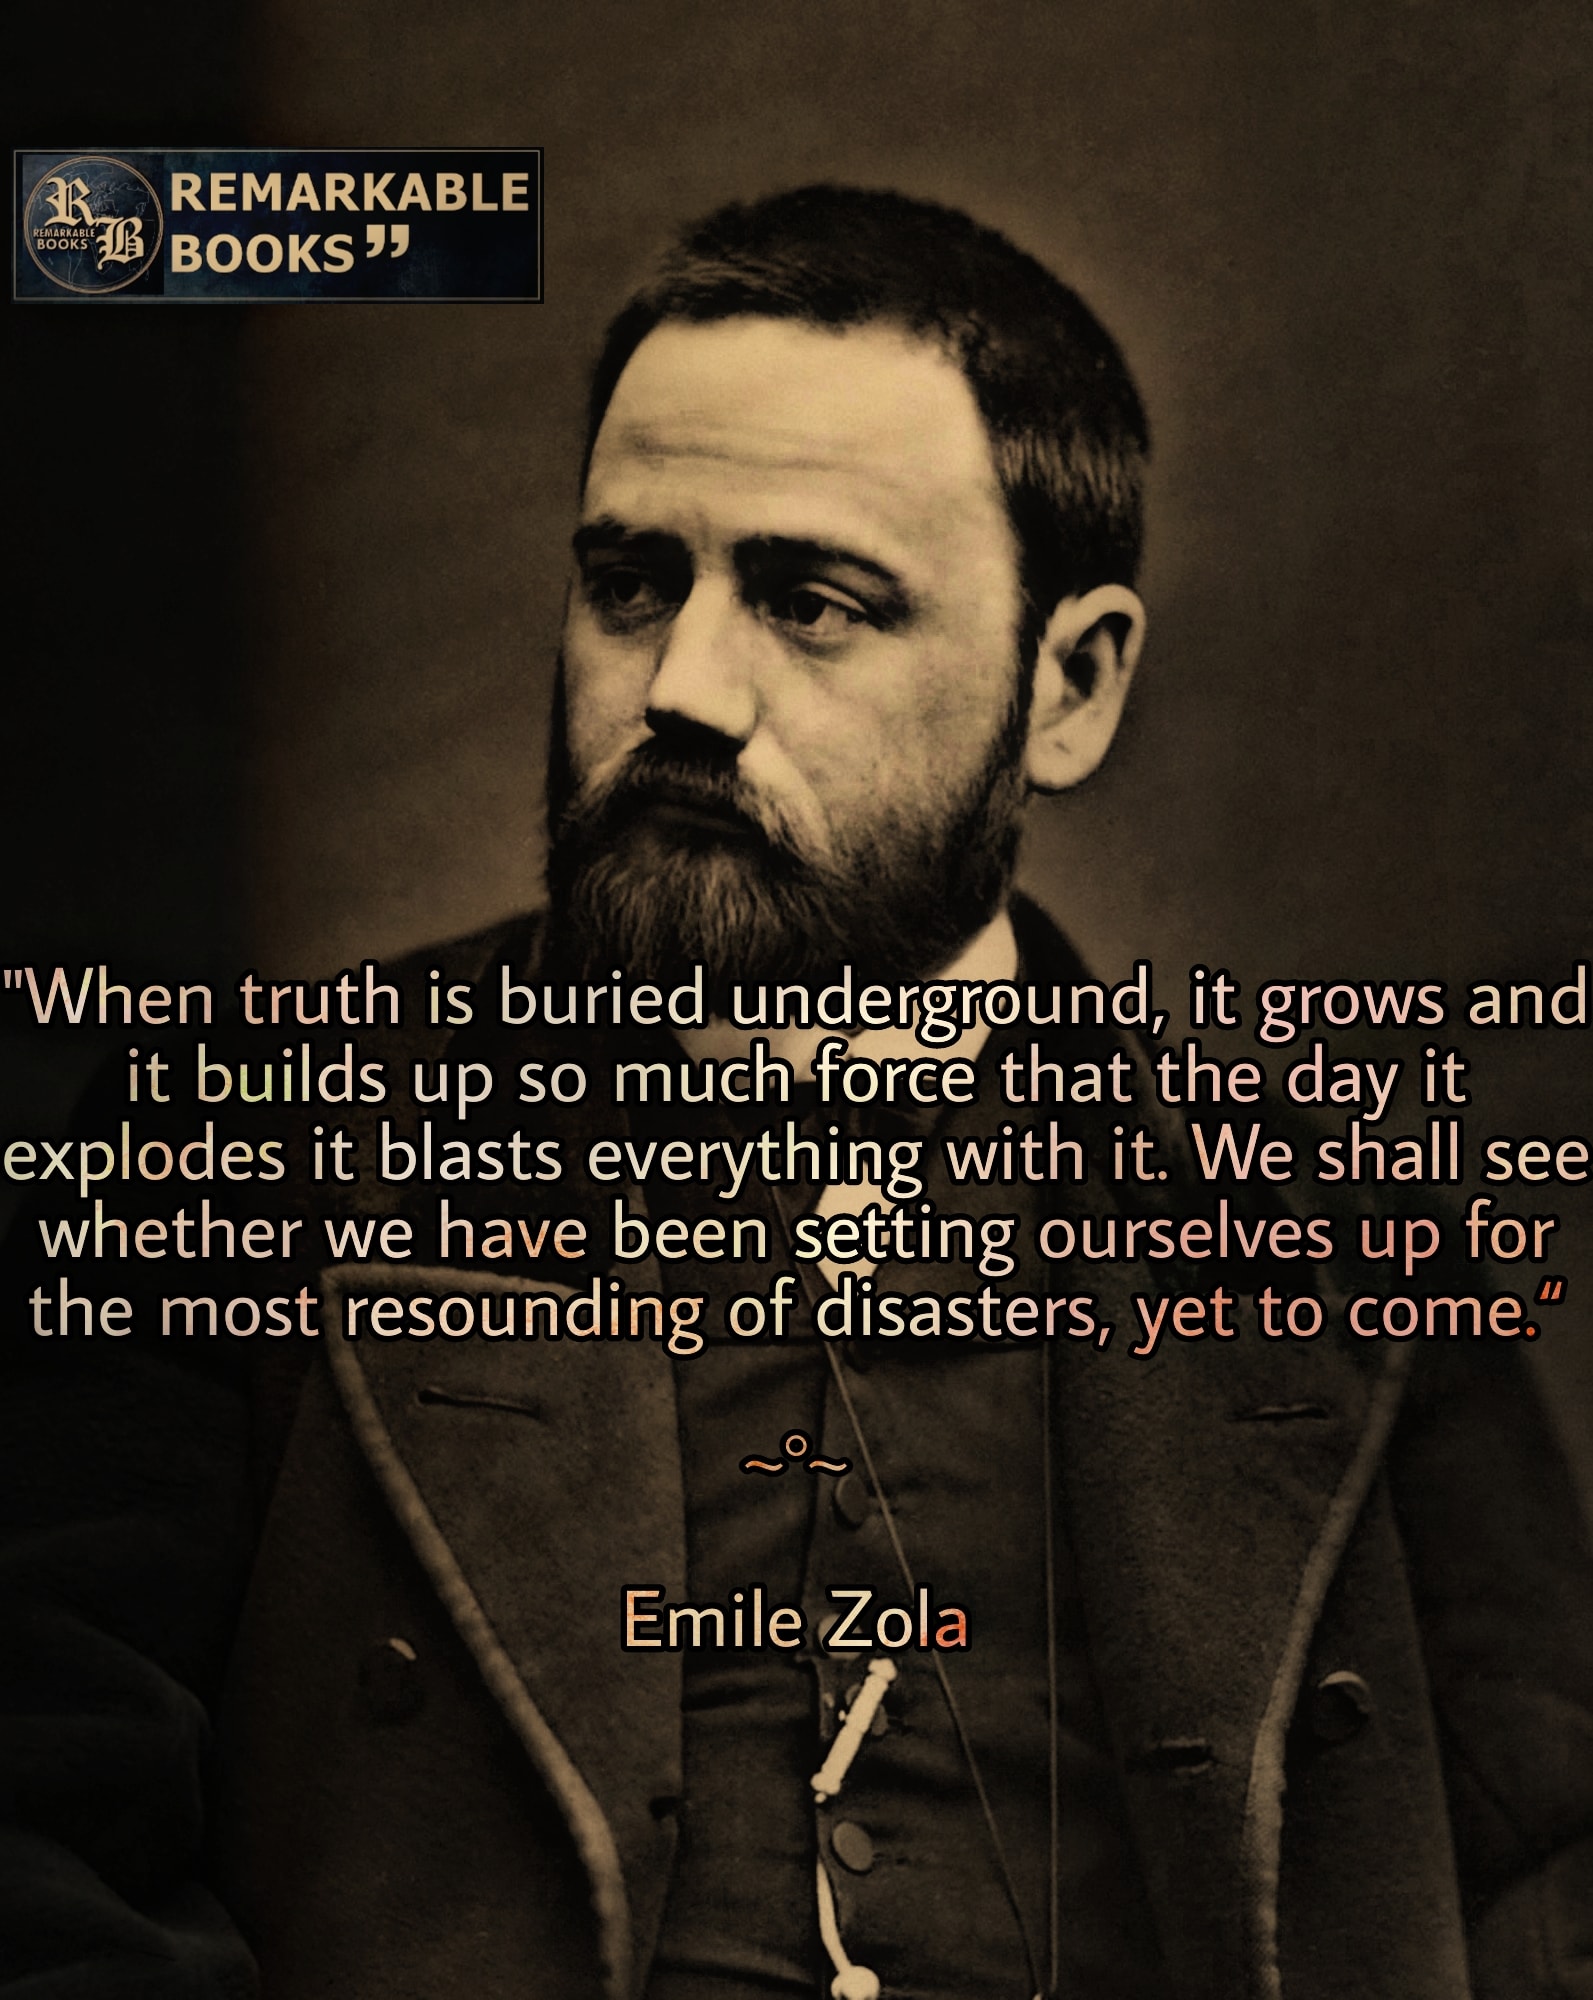 When truth is buried underground it grows, it chokes, it gathers such an explosive force that on the day it bursts out, it blows up everything with it.